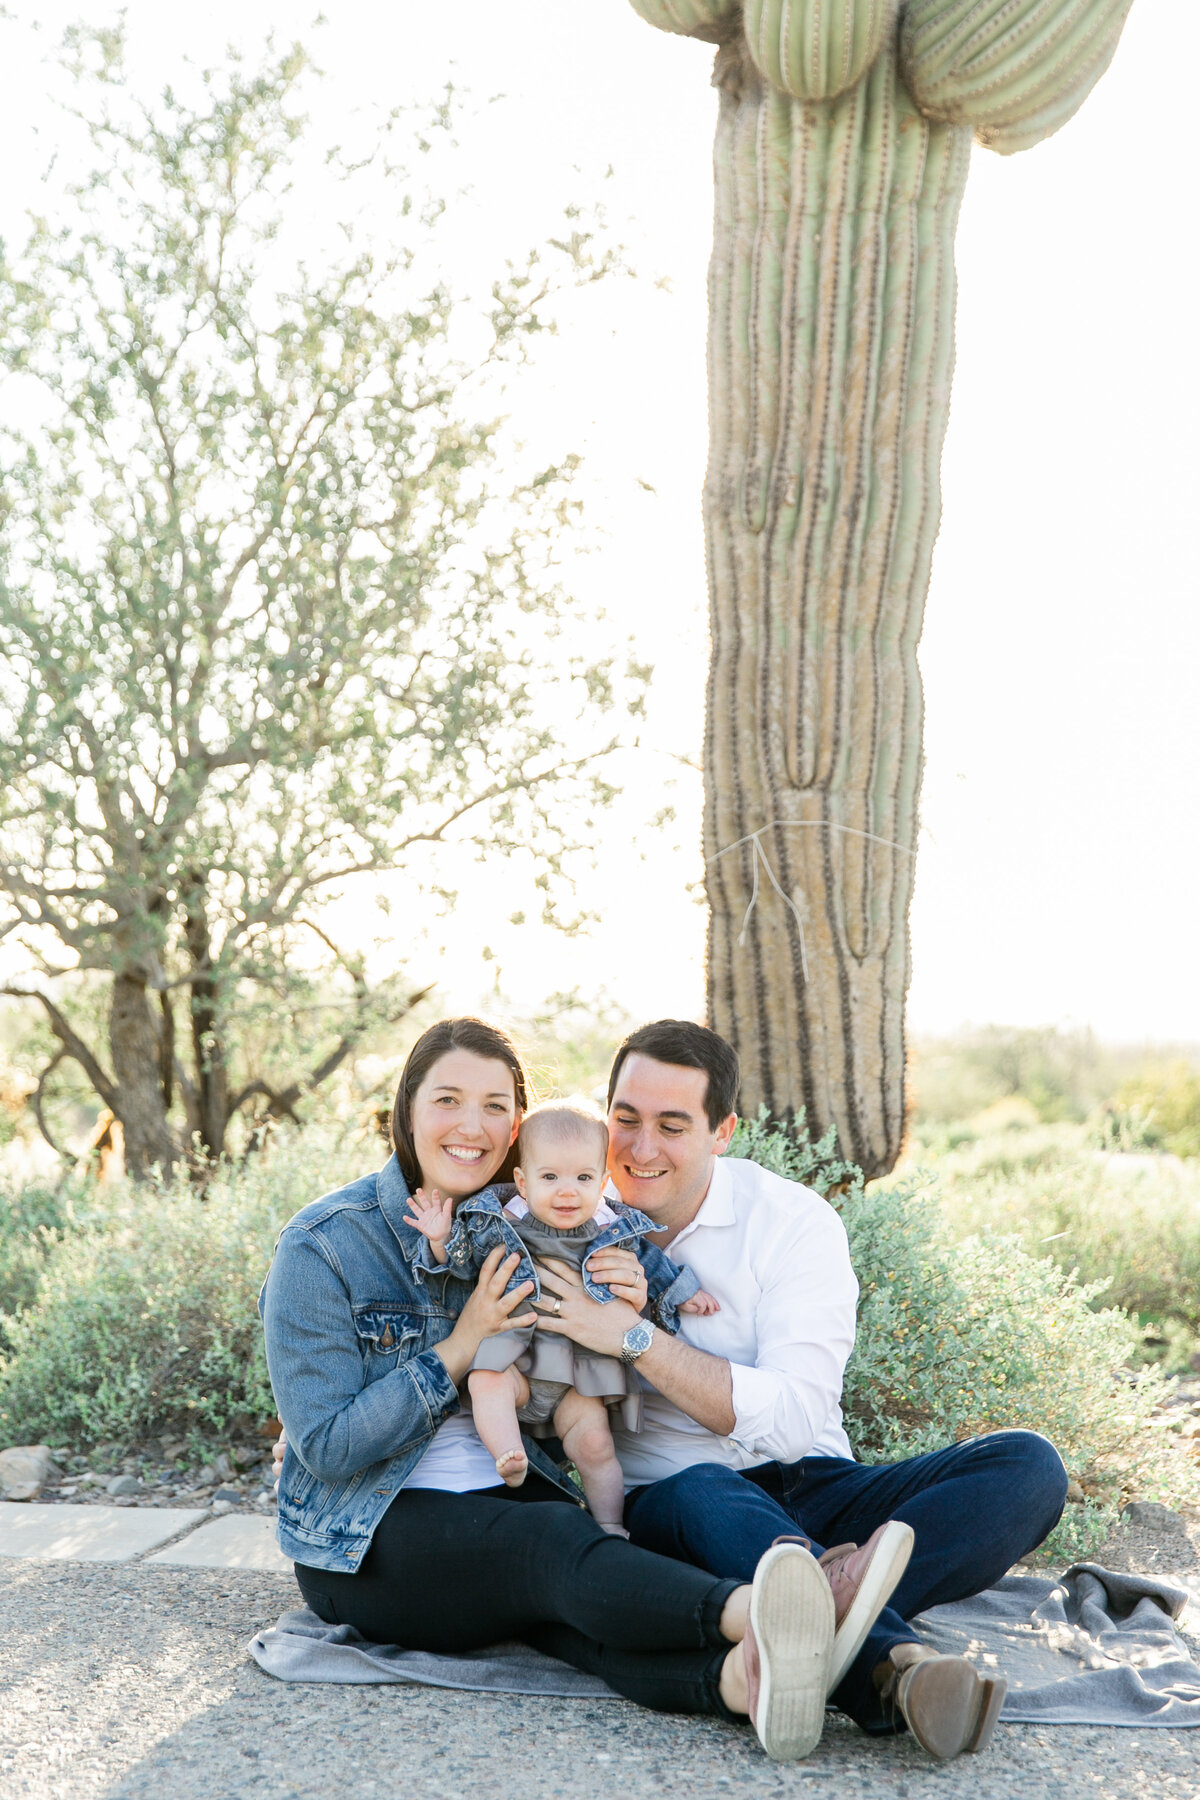 Karlie Colleen Photography - Scottsdale family photography - Victoria & family-126